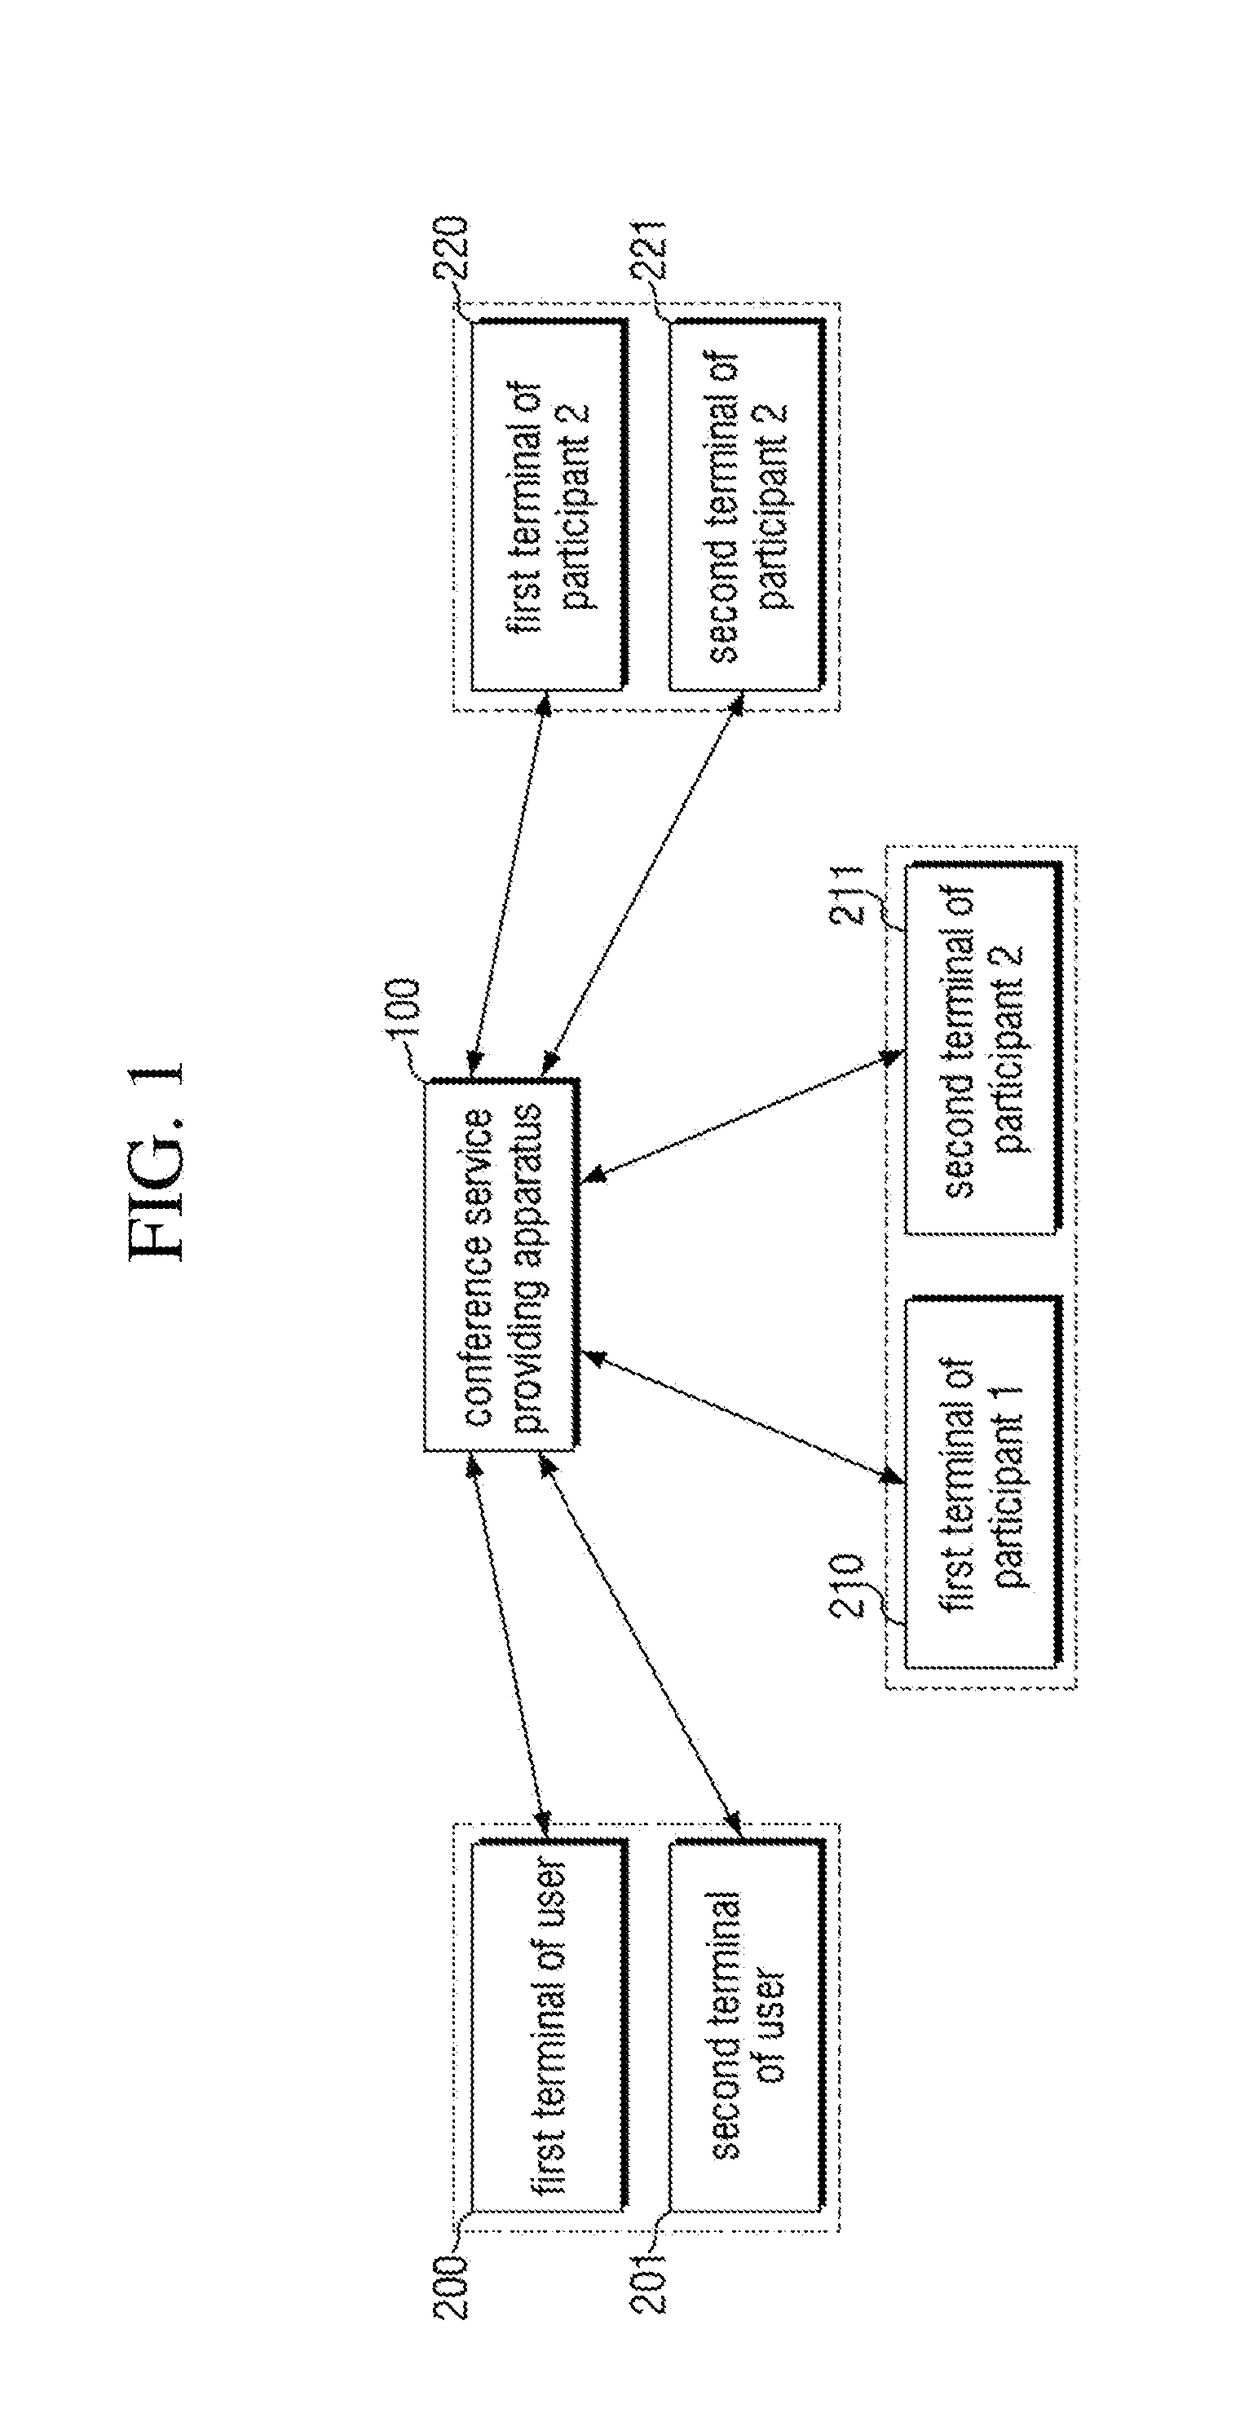 Method for providing conference service and apparatus thereof